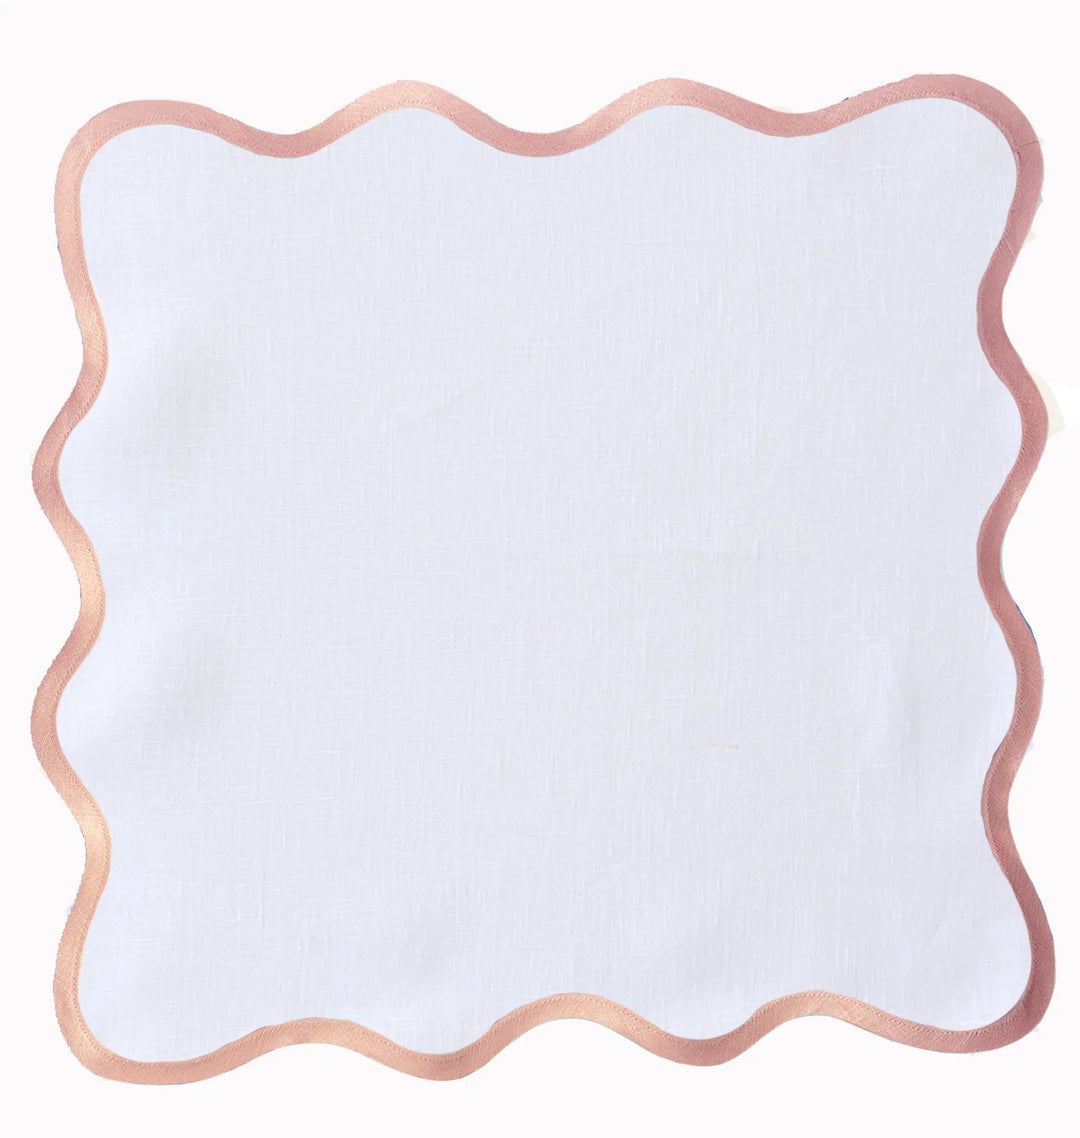 Linen Scalloped Square | Lily White with Peony Pink Trim | PRE-ORDER ONLY